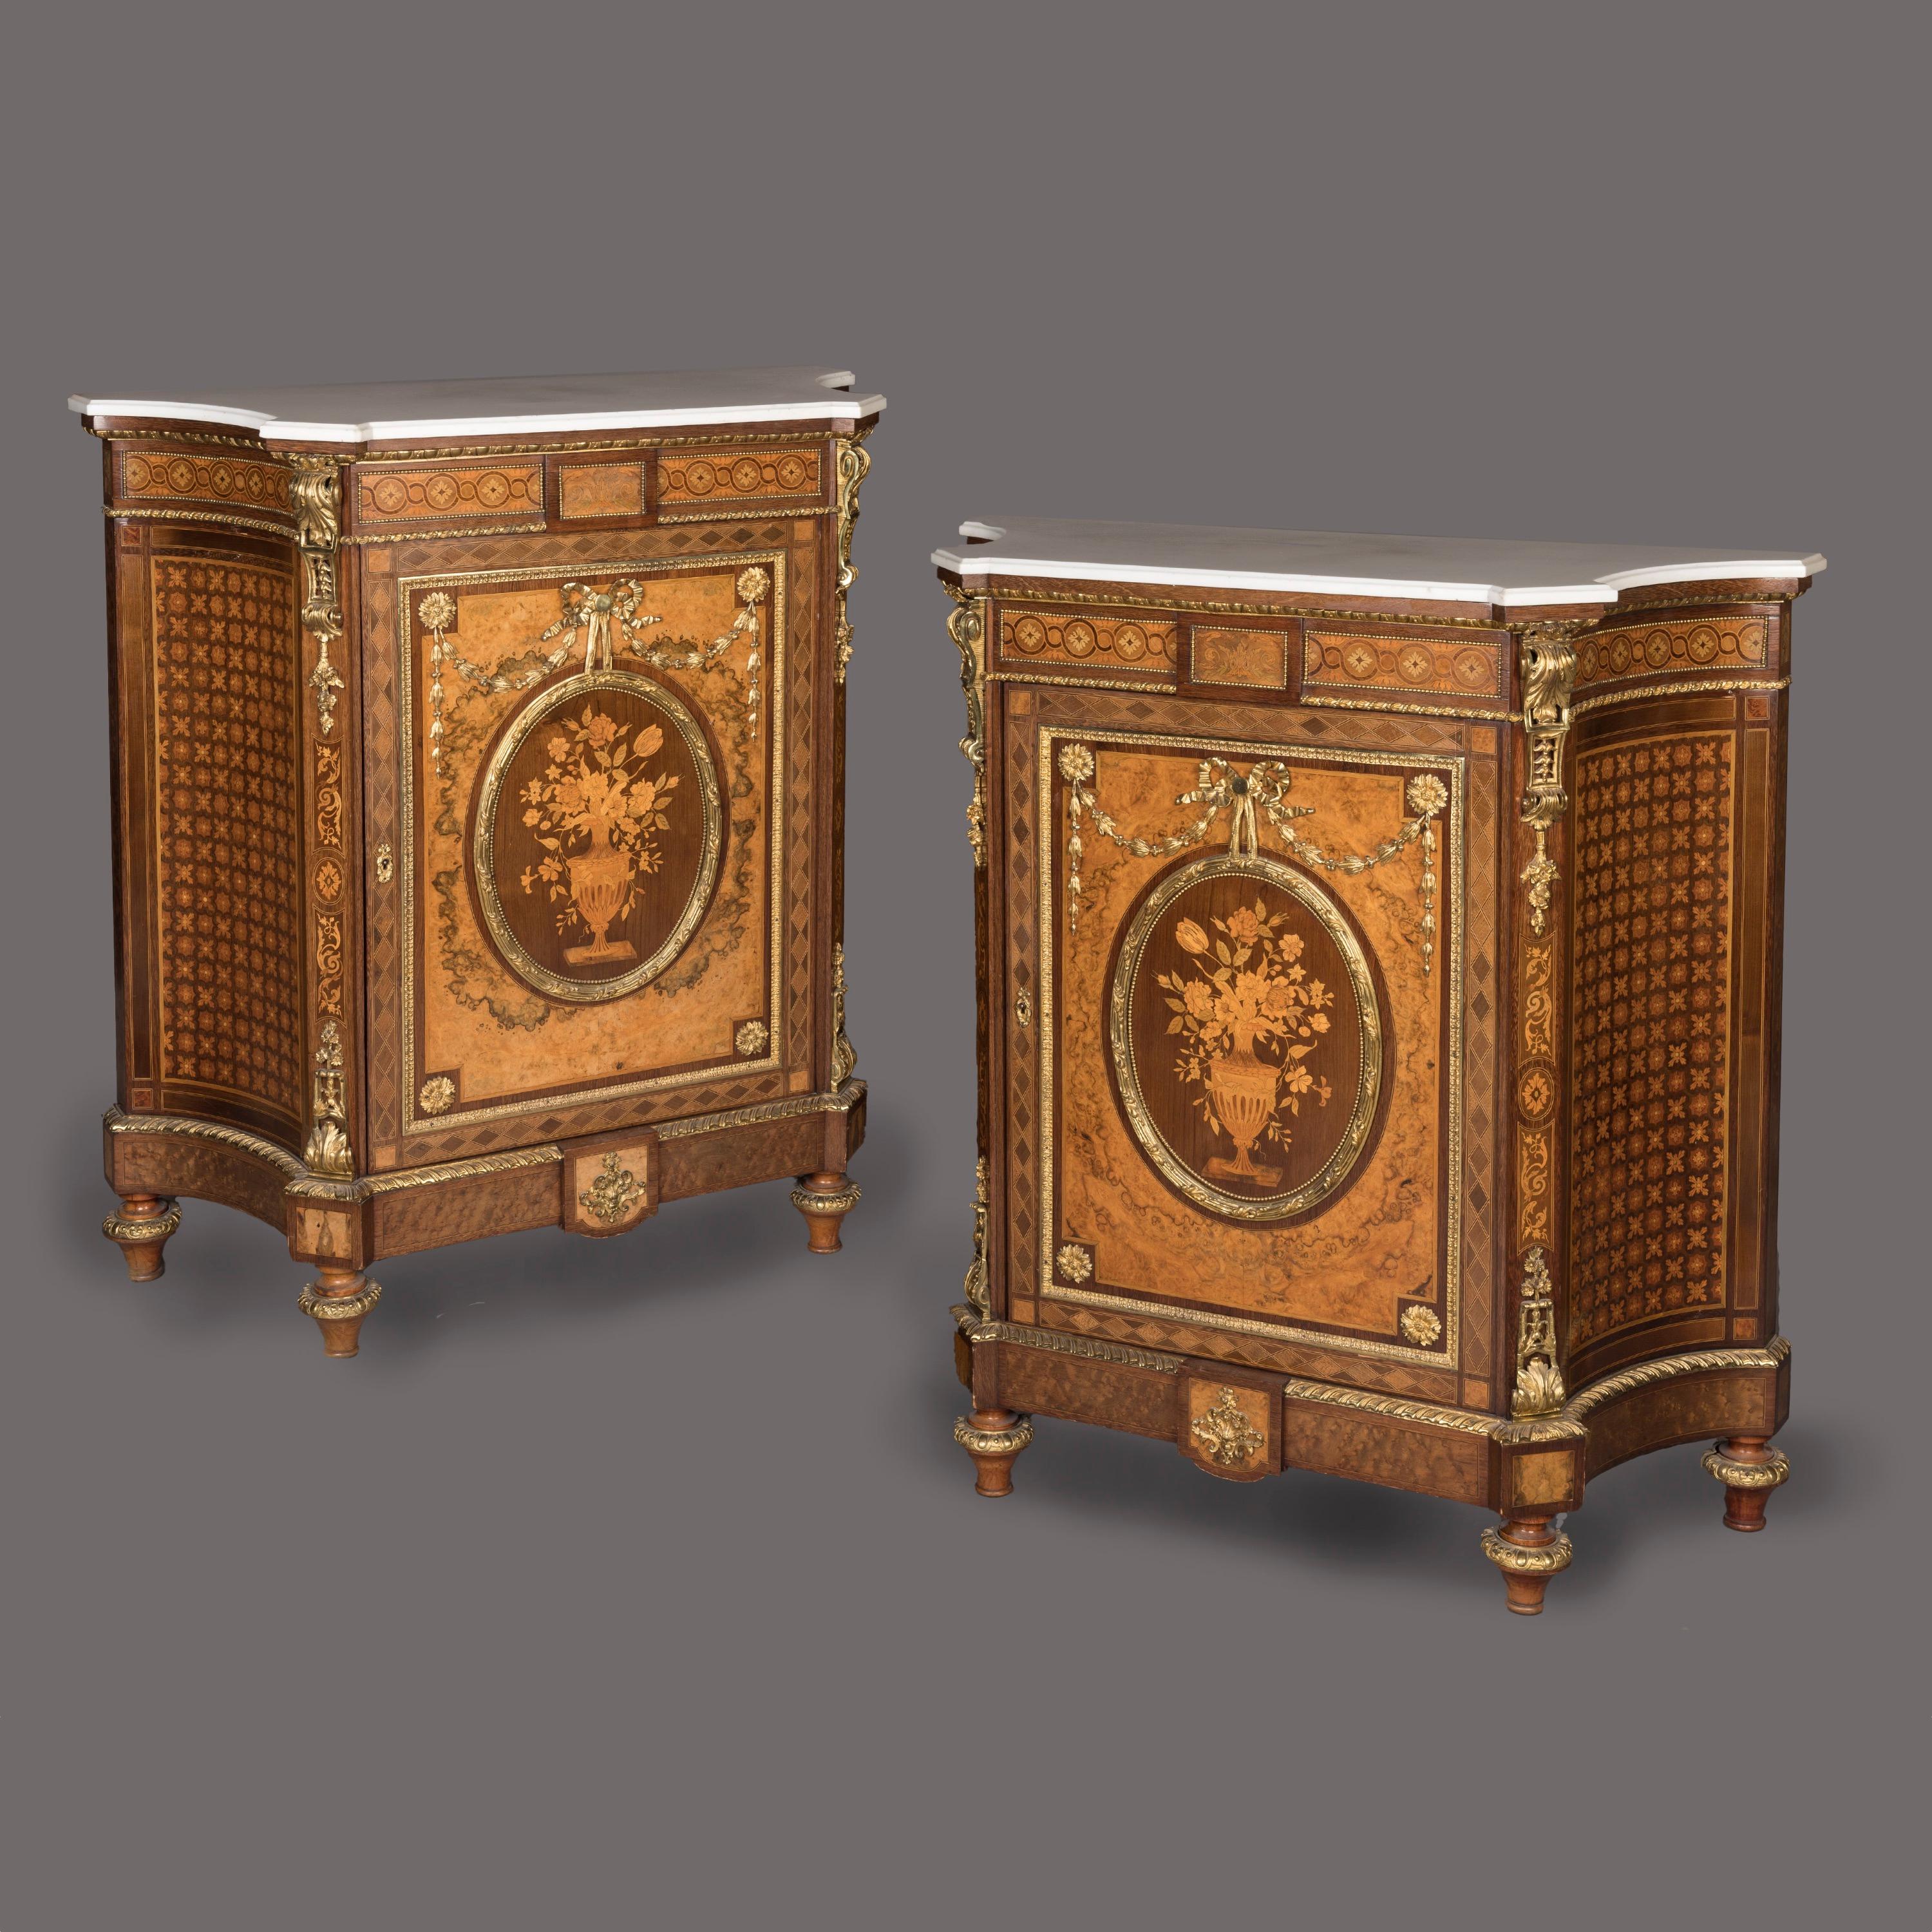 A Fine Pair of Louis XVI Style 
Marquetry Inlaid Meubles d'Appui

Constructed from a striking burr walnut, with marquetry inlays of various specimen woods including harewood, boxwood and sycamore, with amaranth crossbanding and decorated with ormolu